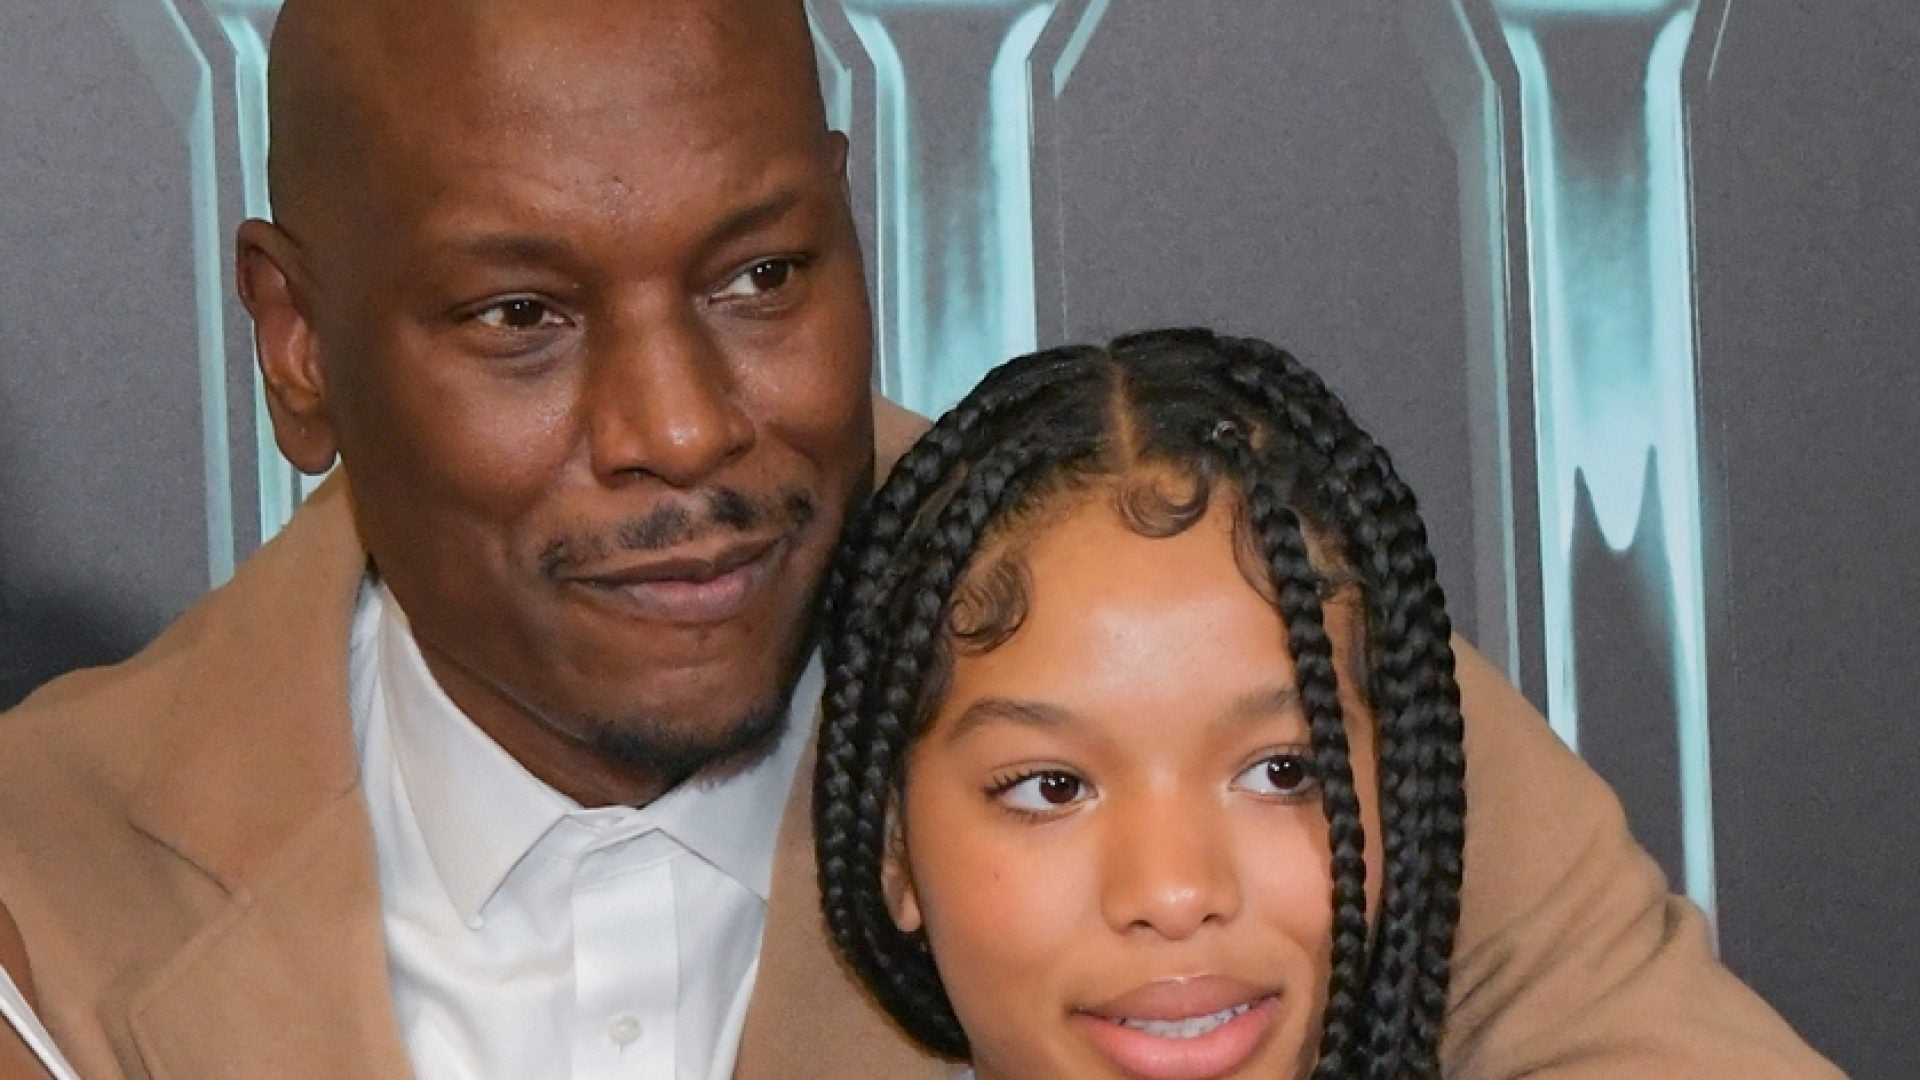 Tyrese Rented A Ferris Wheel And Turned His Backyard Into A Nightclub To Celebrate His Daughter's Sweet 16